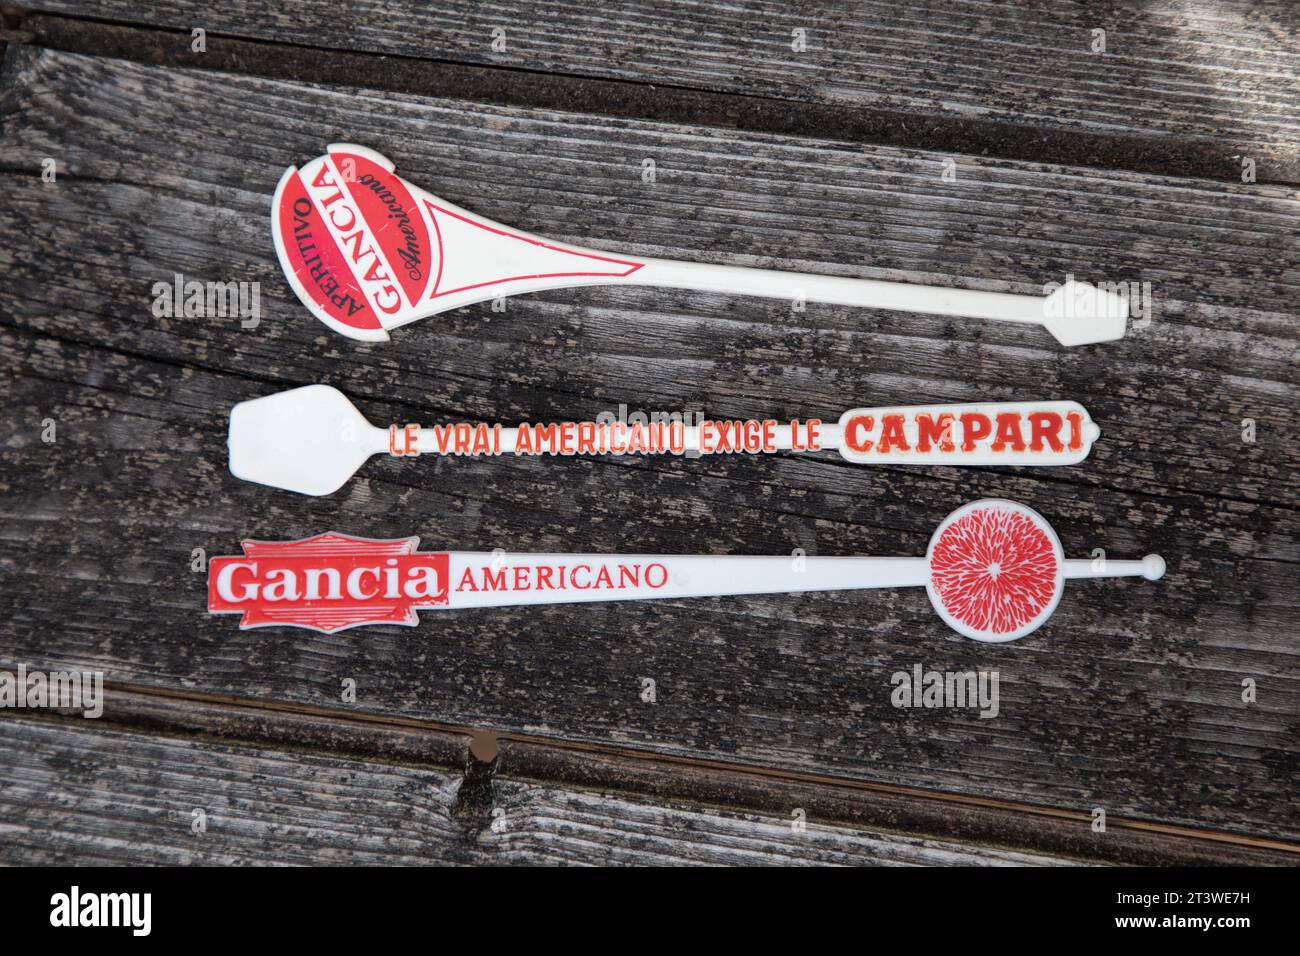 Bordeaux , France - 10 19 2023 : Gancia and campari vermouth logo brand and text sign on cocktail stirrer advertising alcohol stirrers Stock Photo